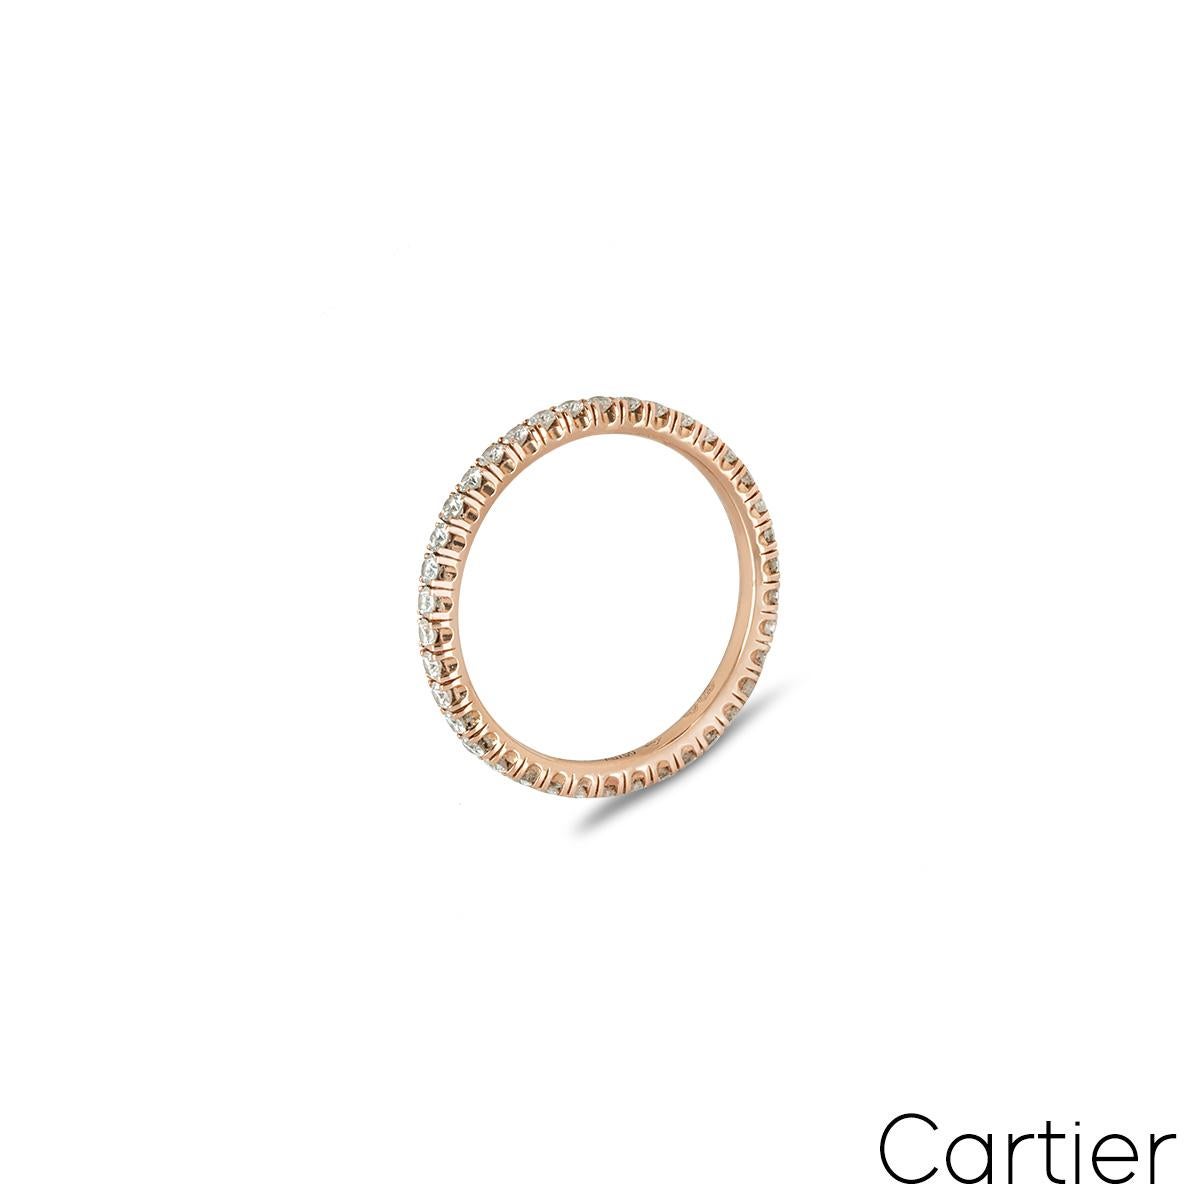 A beautiful 18k rose gold full diamond eternity ring by Cartier from the Étincelle de Cartier collection. The wedding band is pave set with 38 round brilliant cut diamonds with an approximate total weight of 0.47ct, F-G colour and VS clarity. The